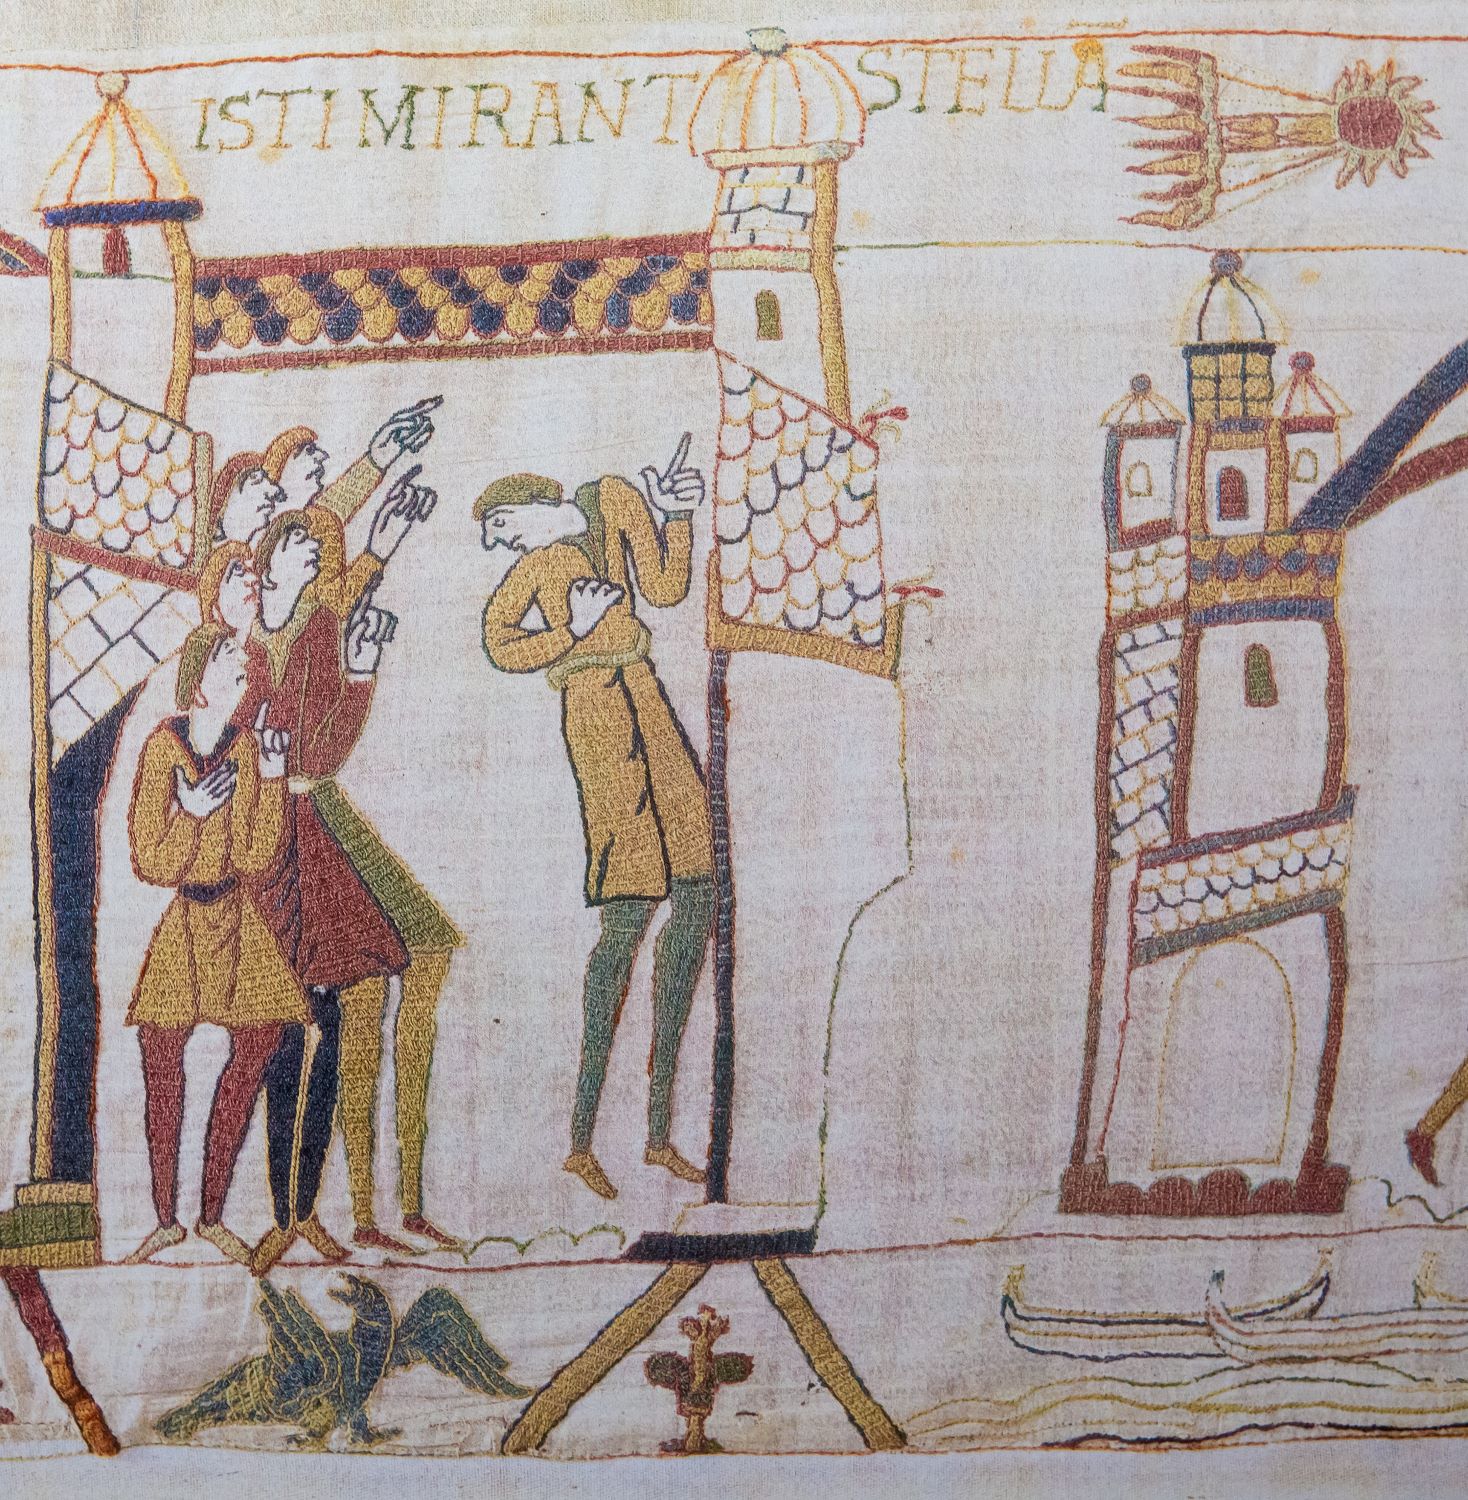 The Bayeux Tapestry depicts Halley's Comet for the first time.